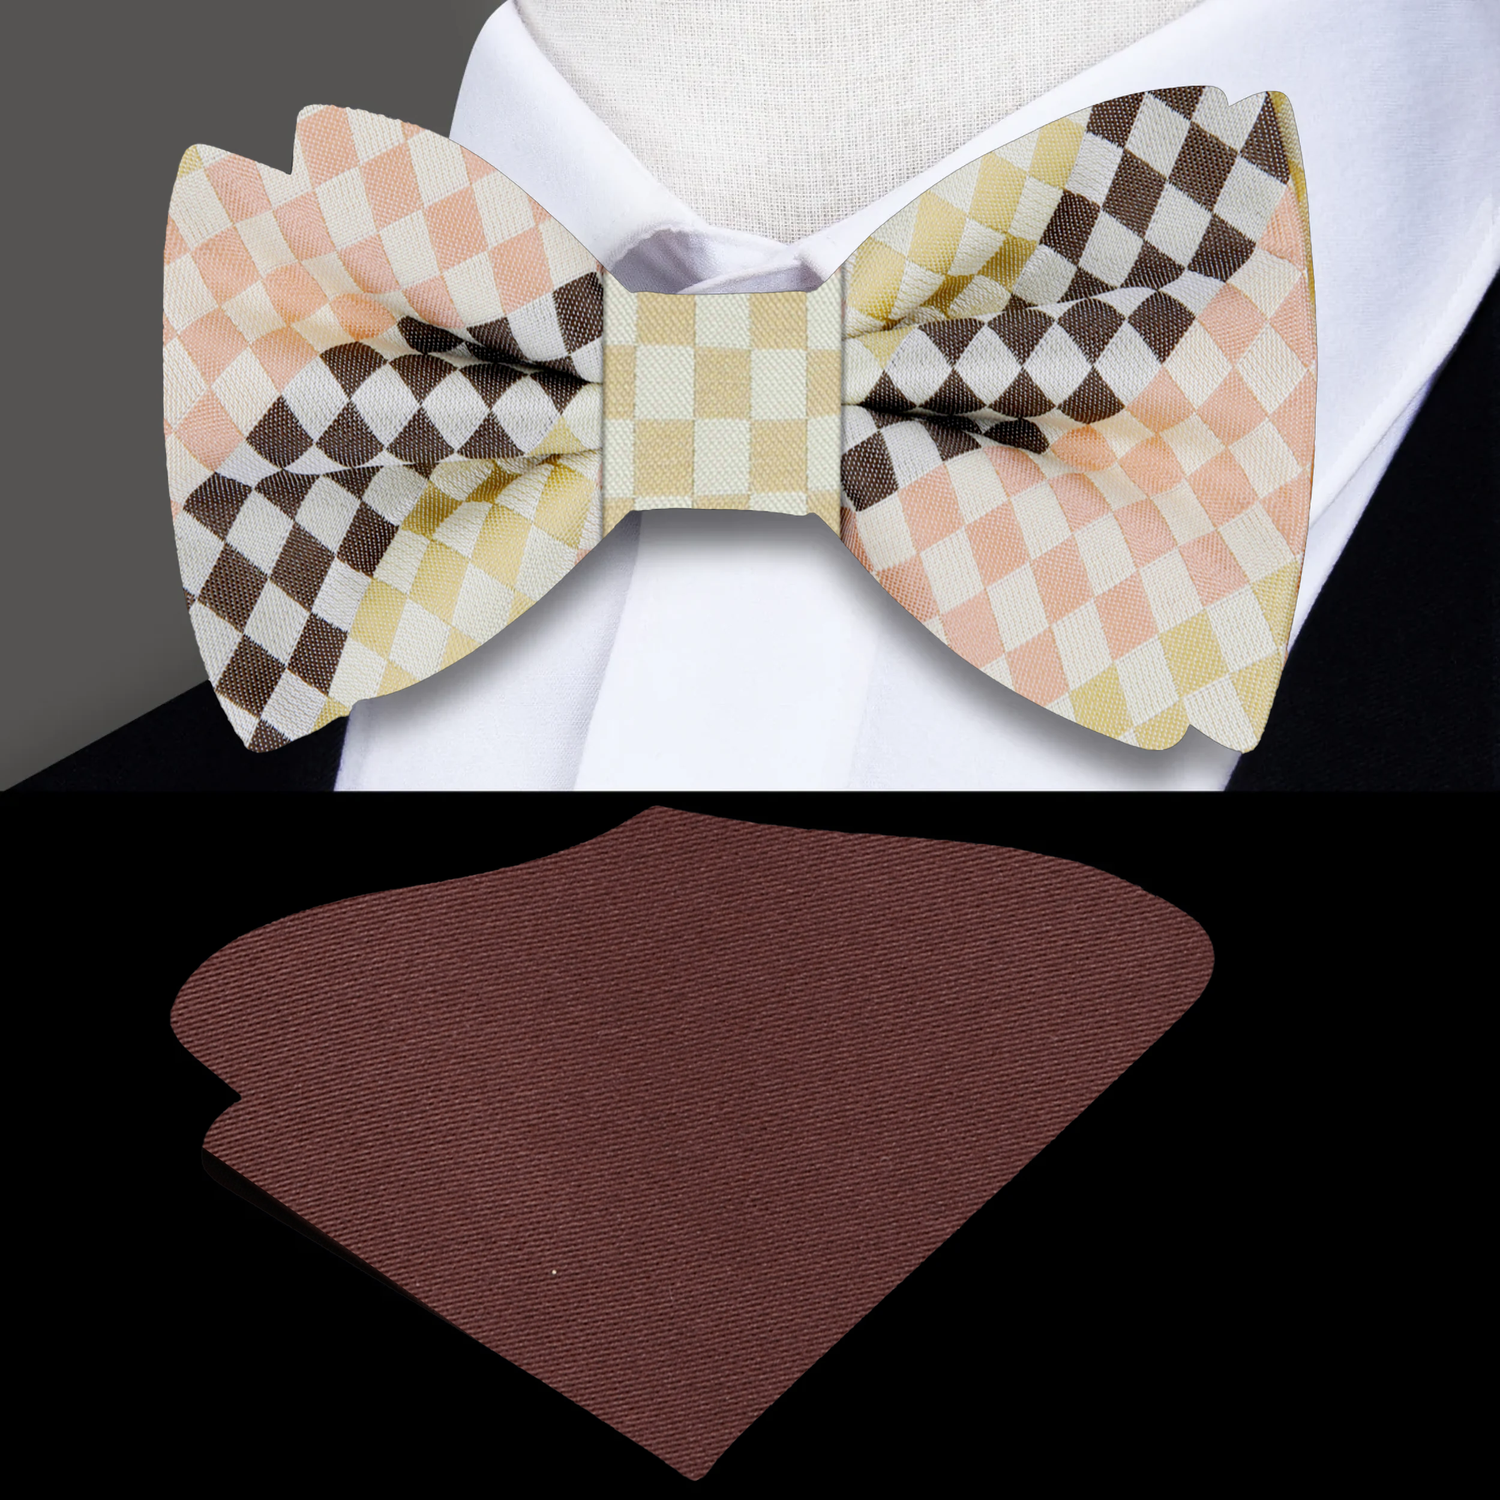 Peach, Brown, Light Yellow Check Bow Tie and Brown Pocket Square